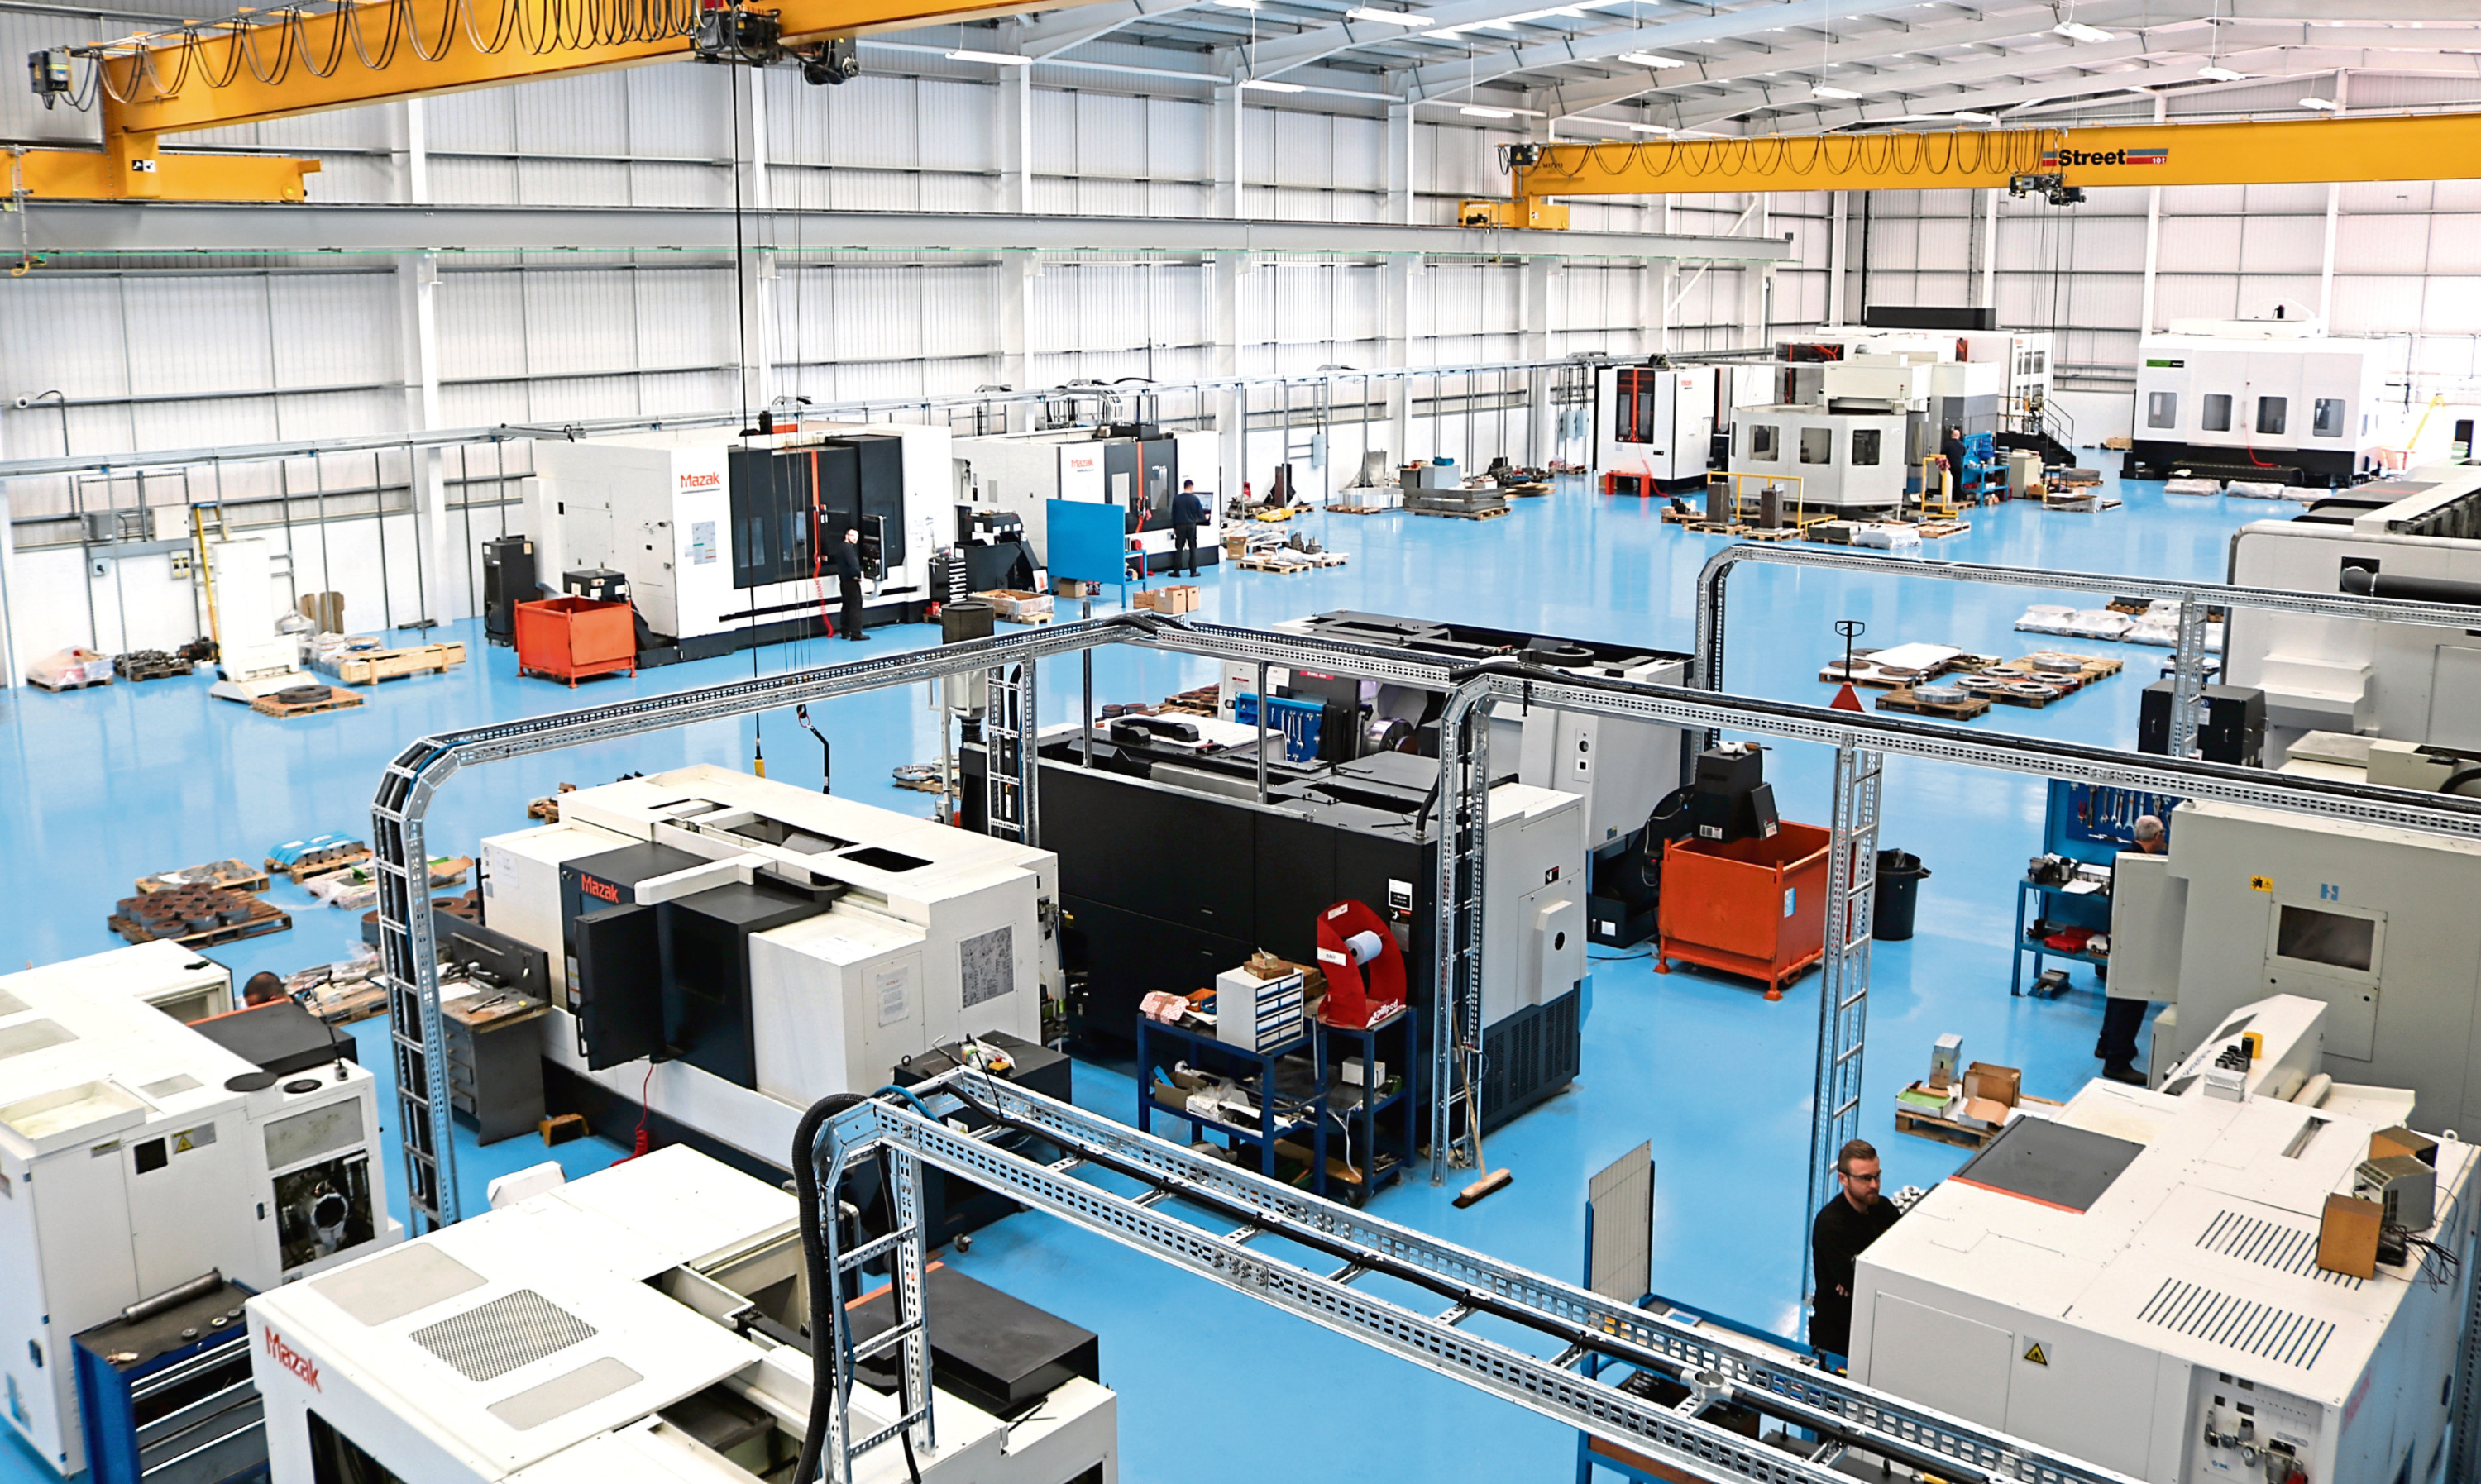 Pryme Group's new facility in North Shields